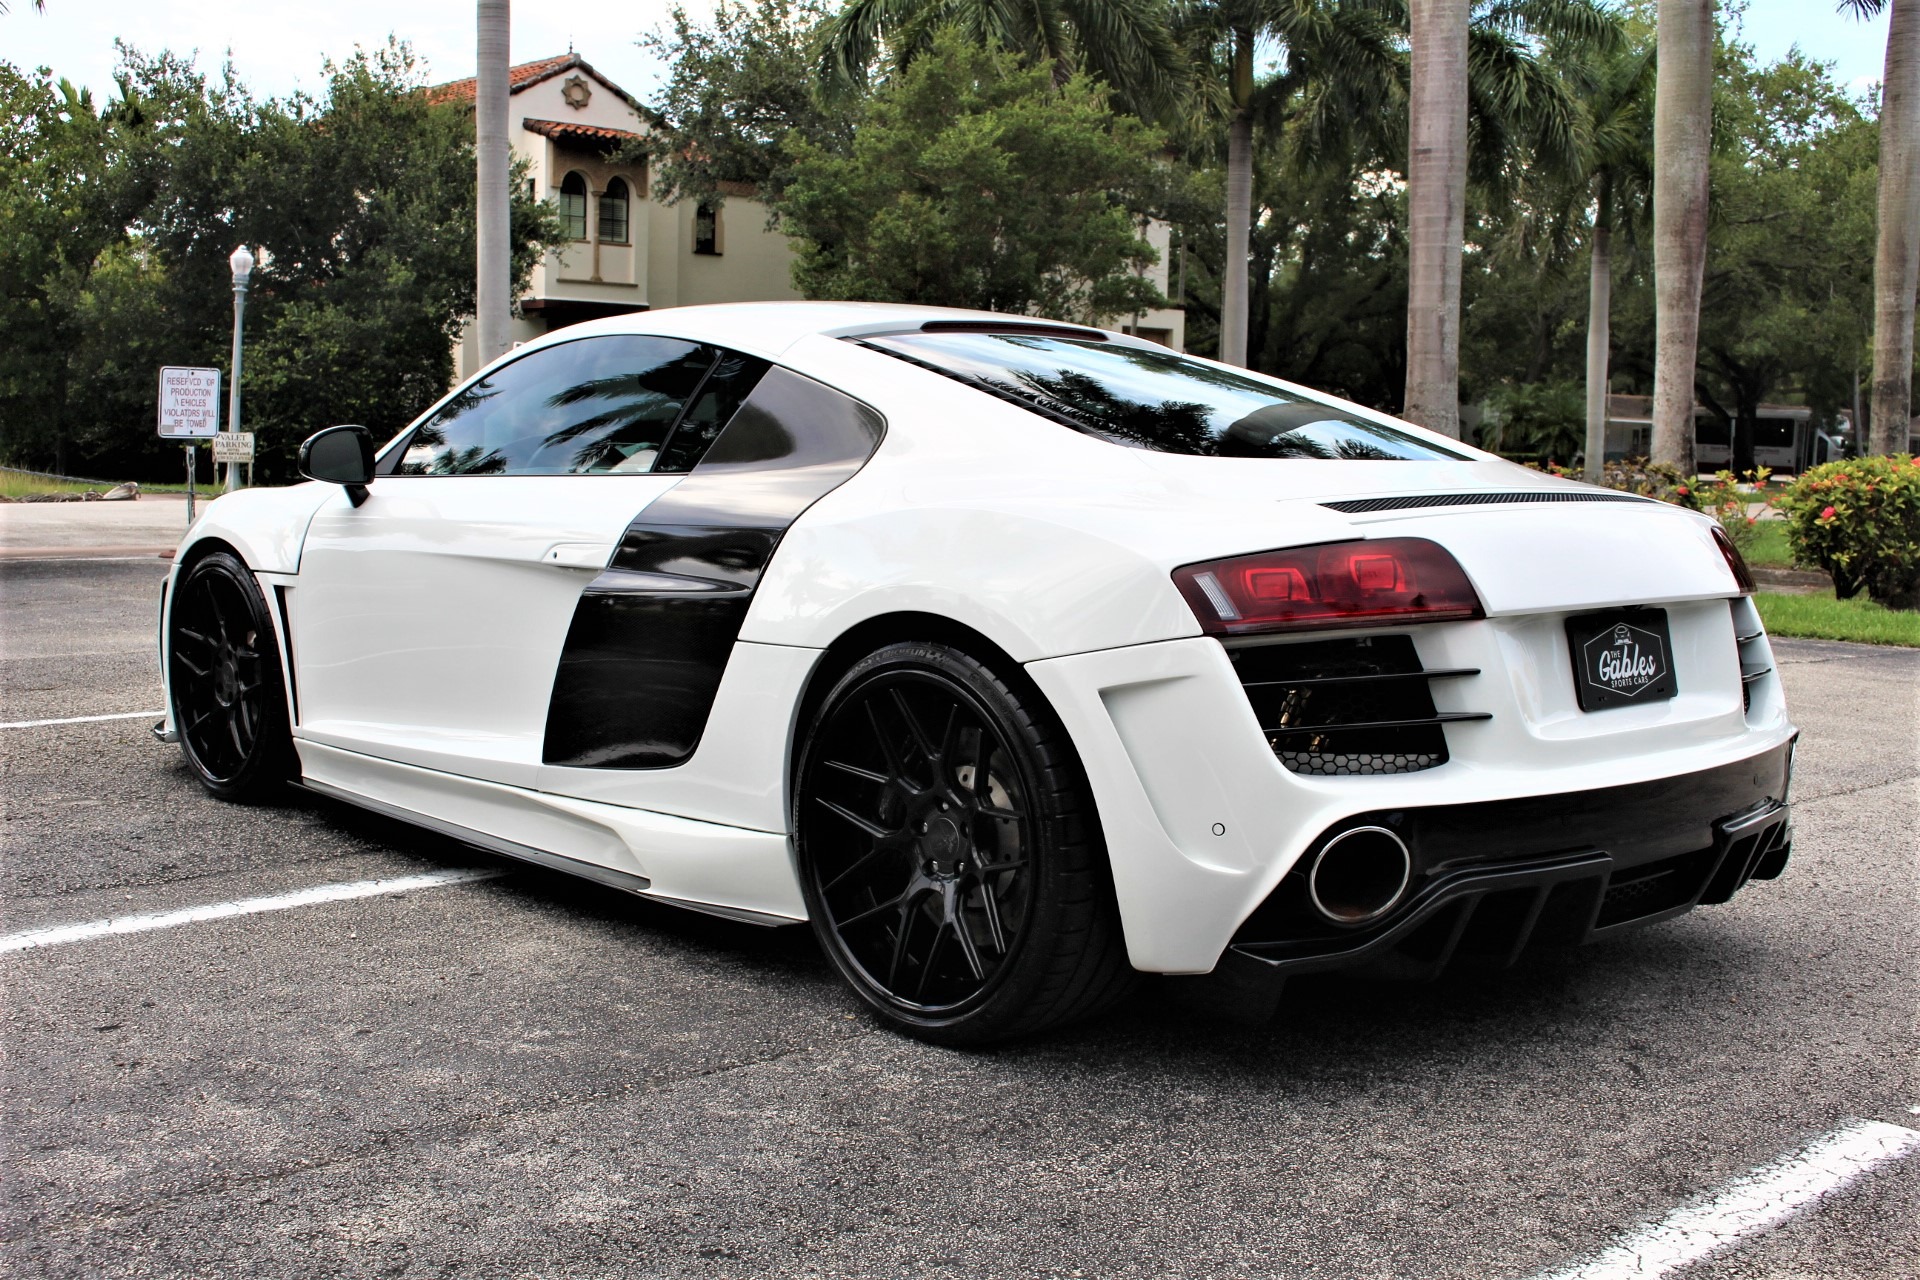 Used 2010 Audi R8 5.2 quattro for sale Sold at The Gables Sports Cars in Miami FL 33146 4